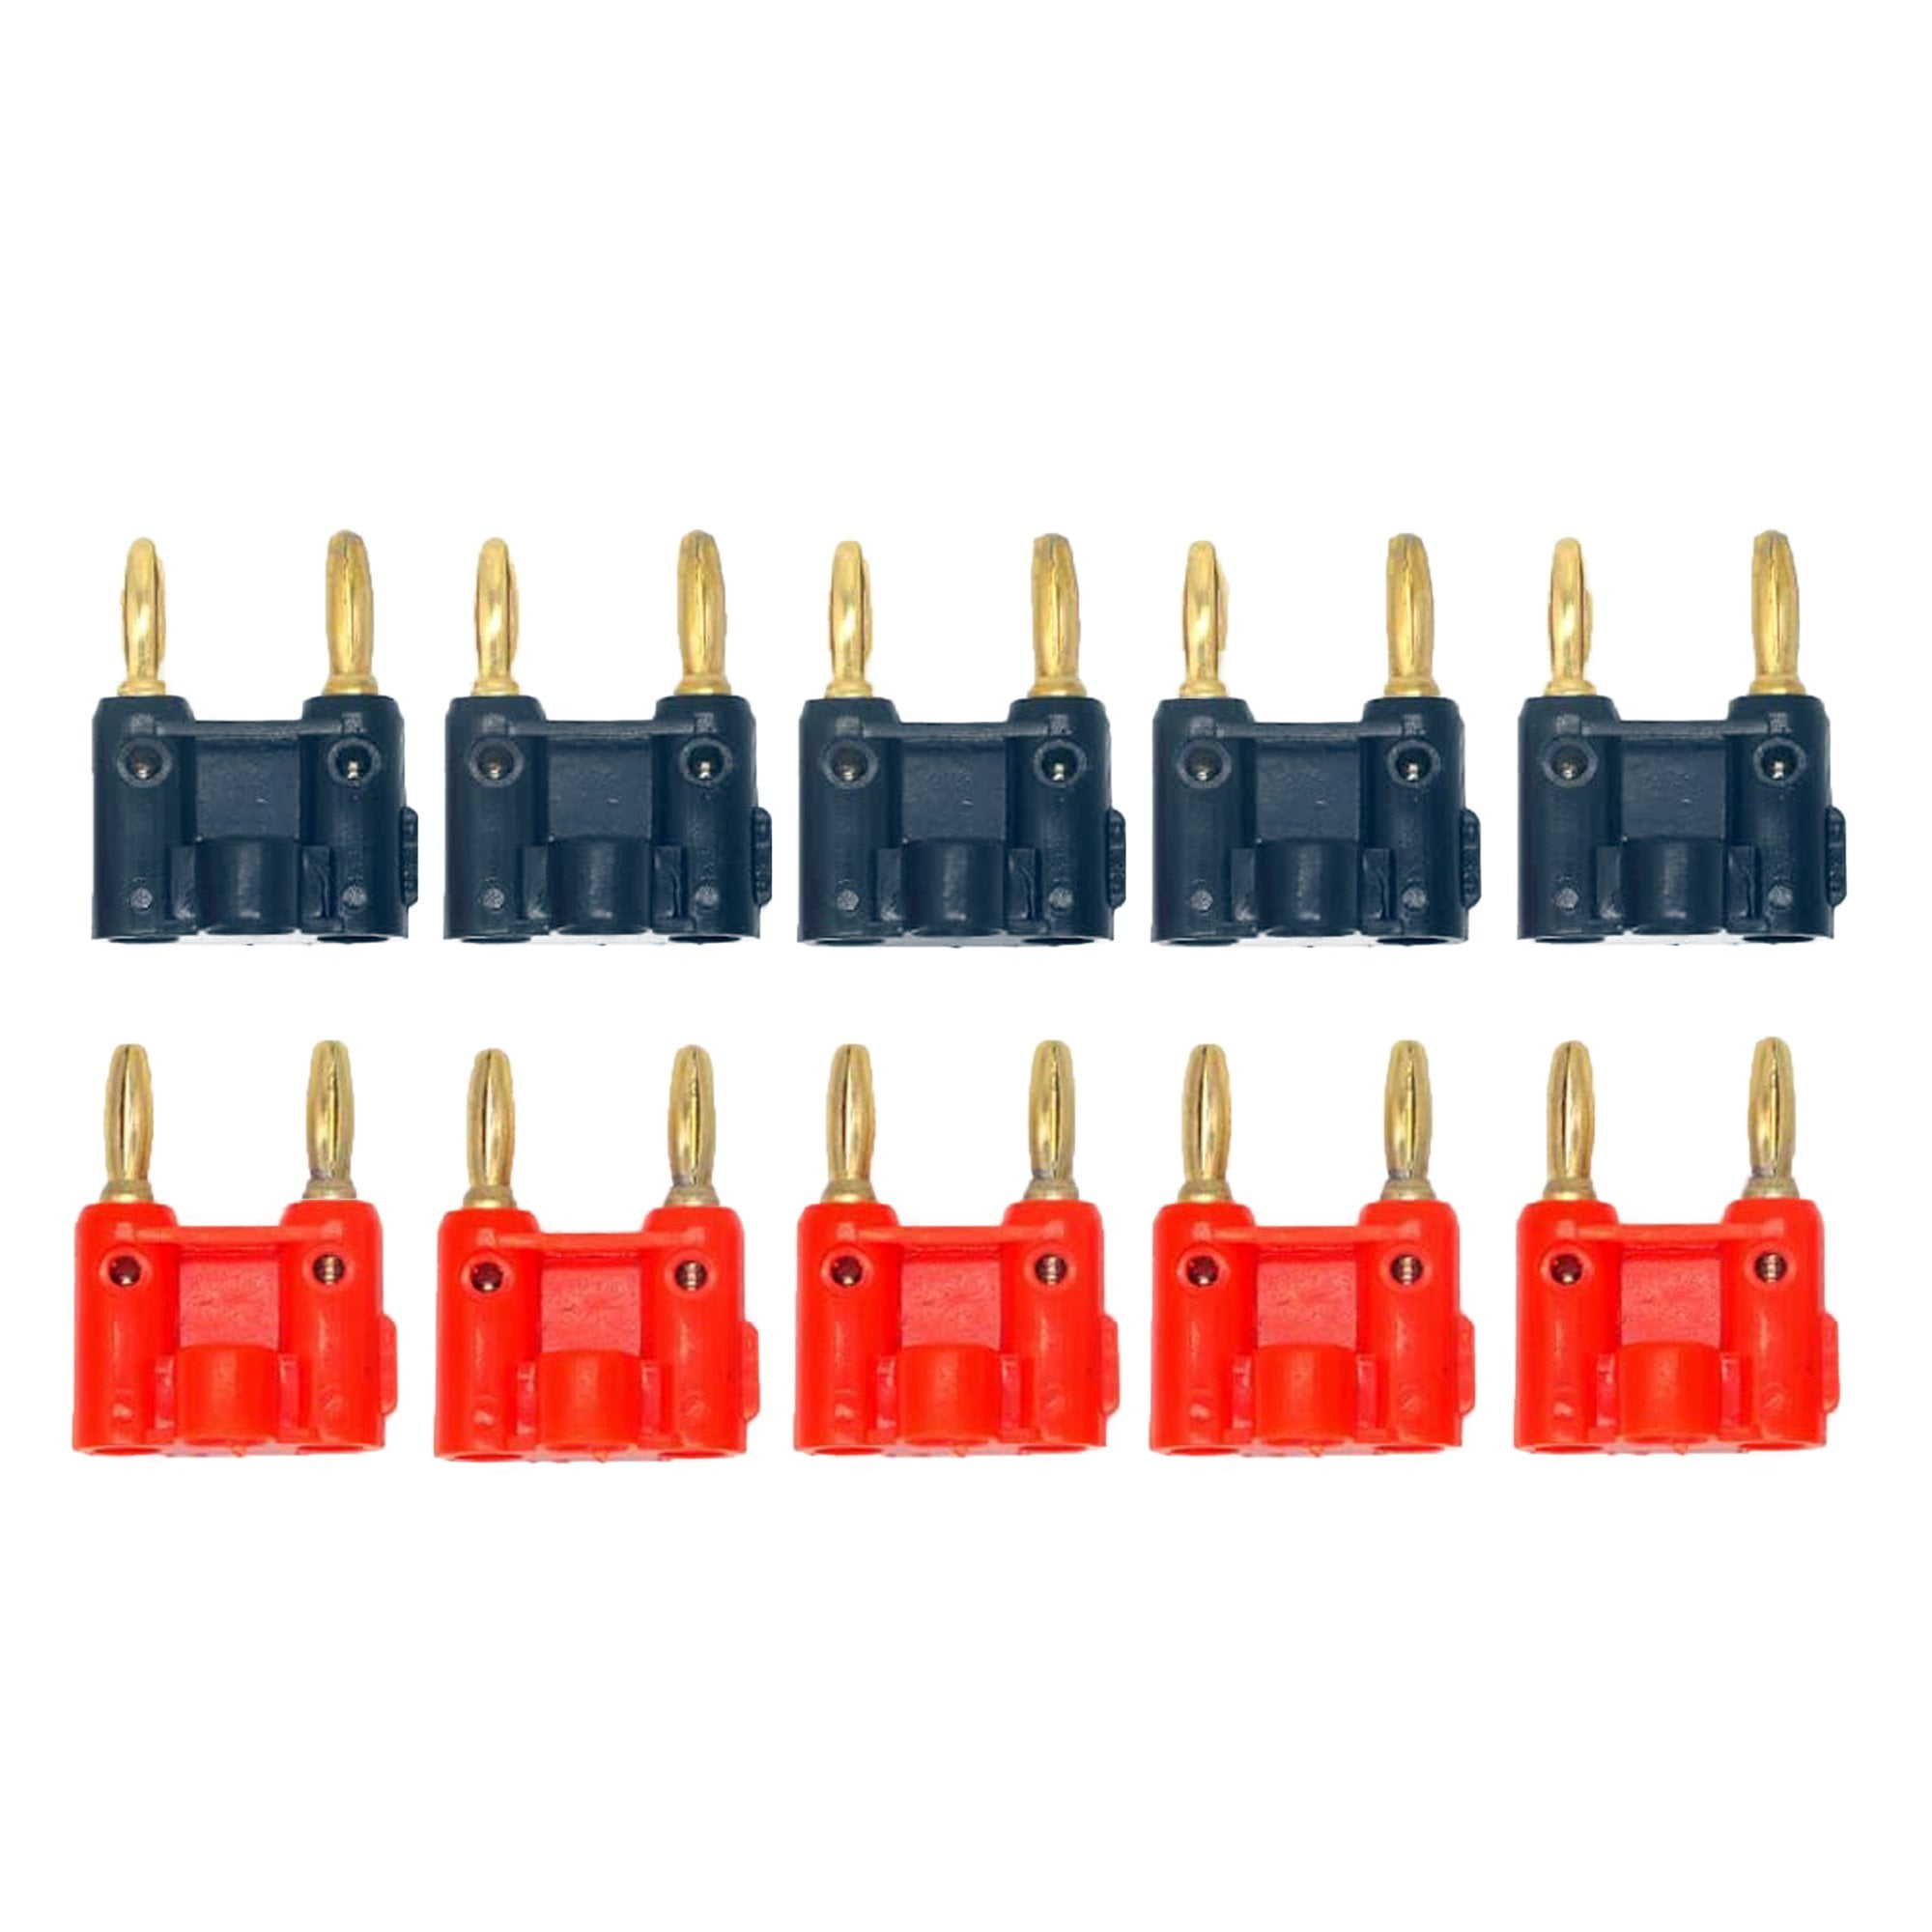 6 Red, 6 Green, 6 Blue, 6 Yellow,6 Black+Screwdriver Speaker Banana Connectors Banana Wall Plates Corrosion-Resistant for AV Receivers Amplifiers Surround Sound CESFONJER4mm Banana Plugs